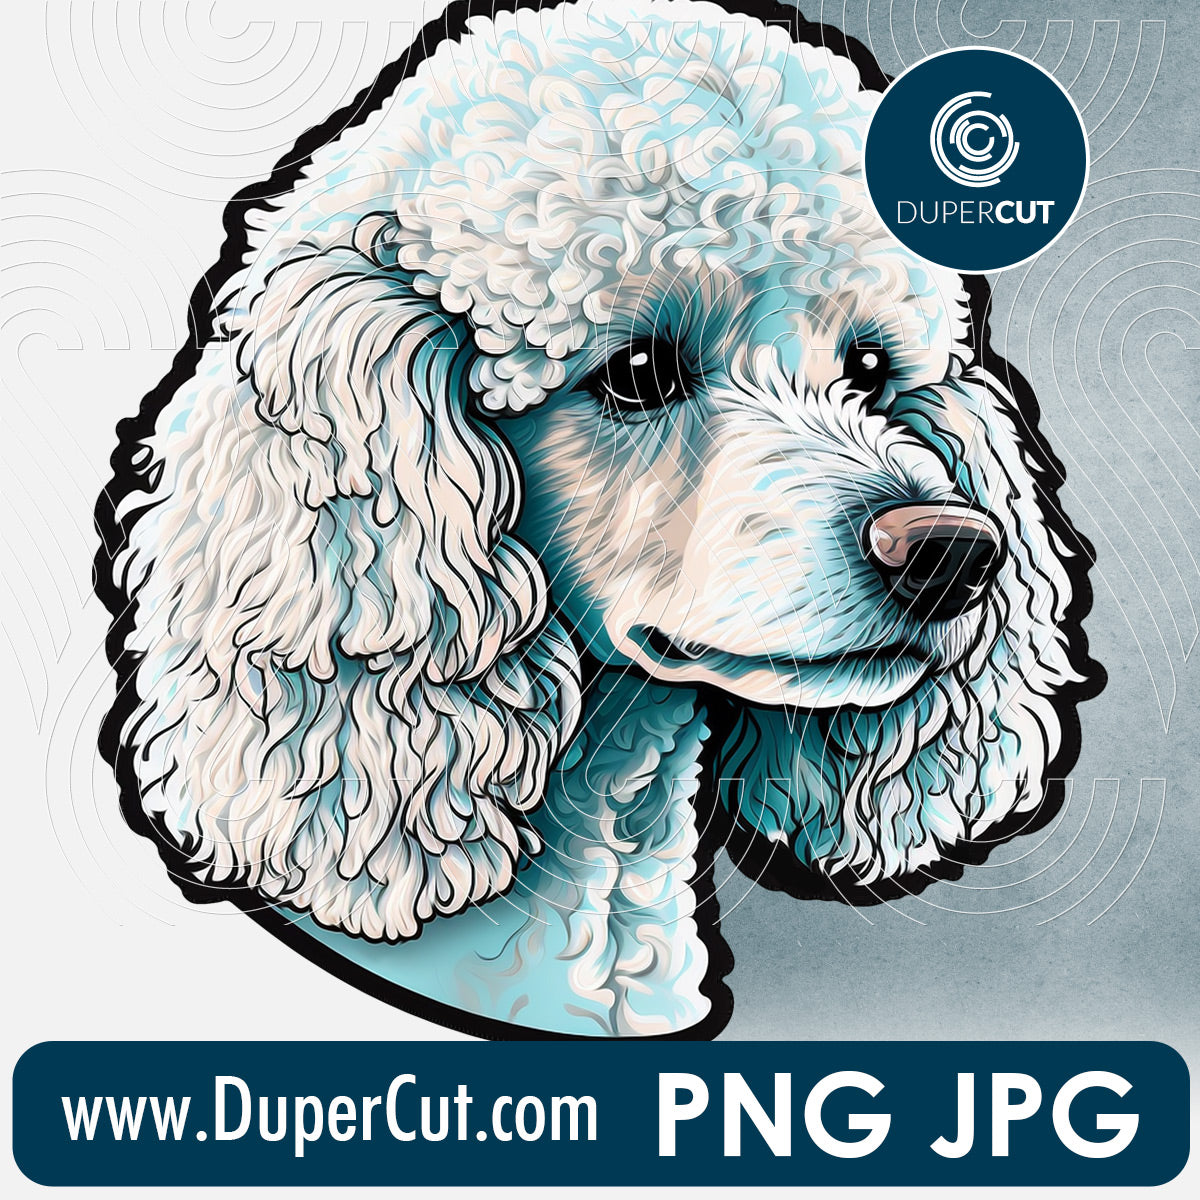 Poodle dog breed - JPG PNG file transparent background, high res pattern for sublimation, print on demand by www.dupercut.com